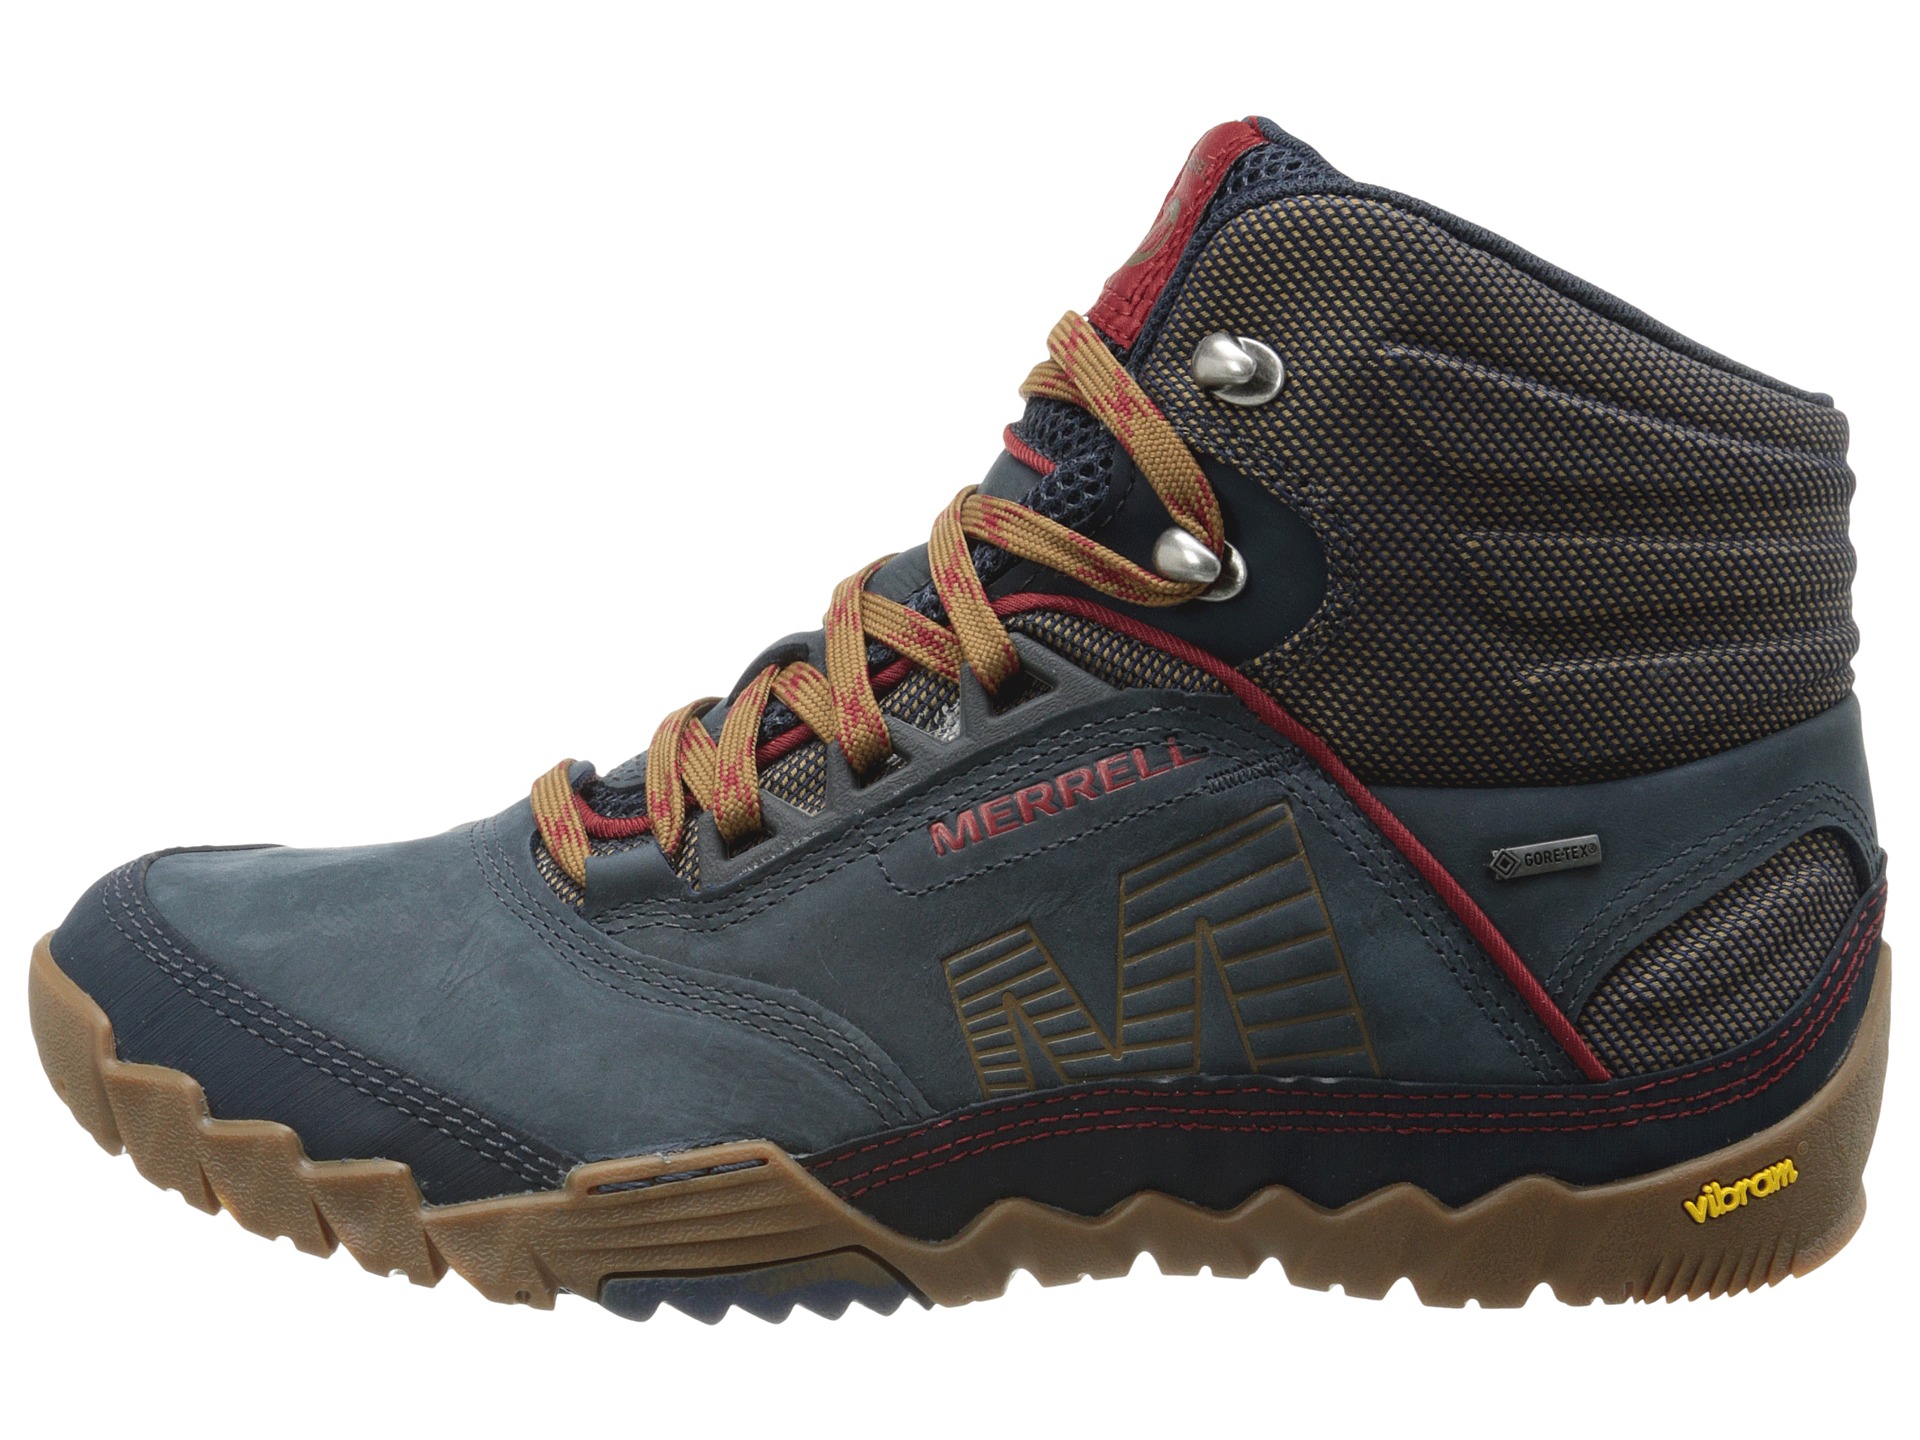 Merrell Annex Mid GORE-TEX® Blue Wing - Zappos.com Free Shipping BOTH Ways